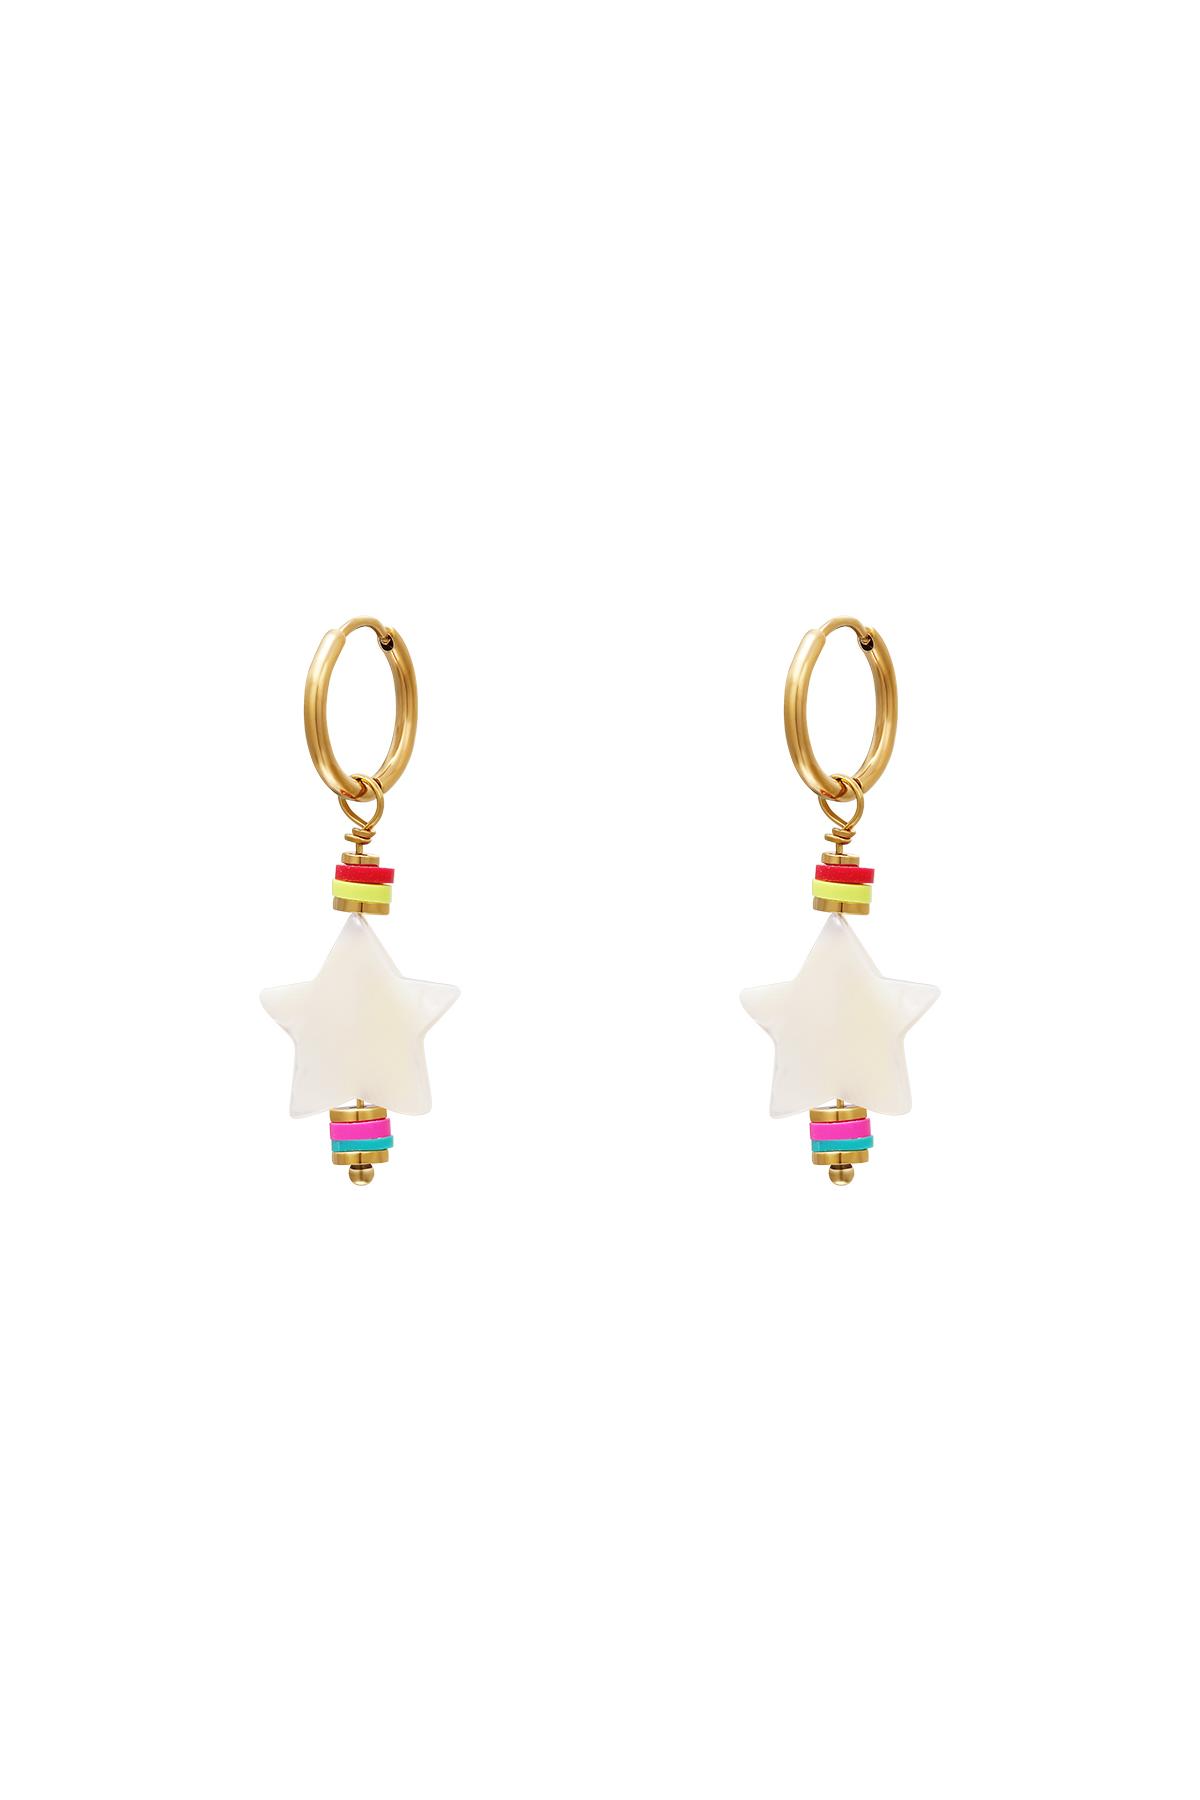 Beads & Stars earrings - #summergirls collection Gold Sea Shells h5 